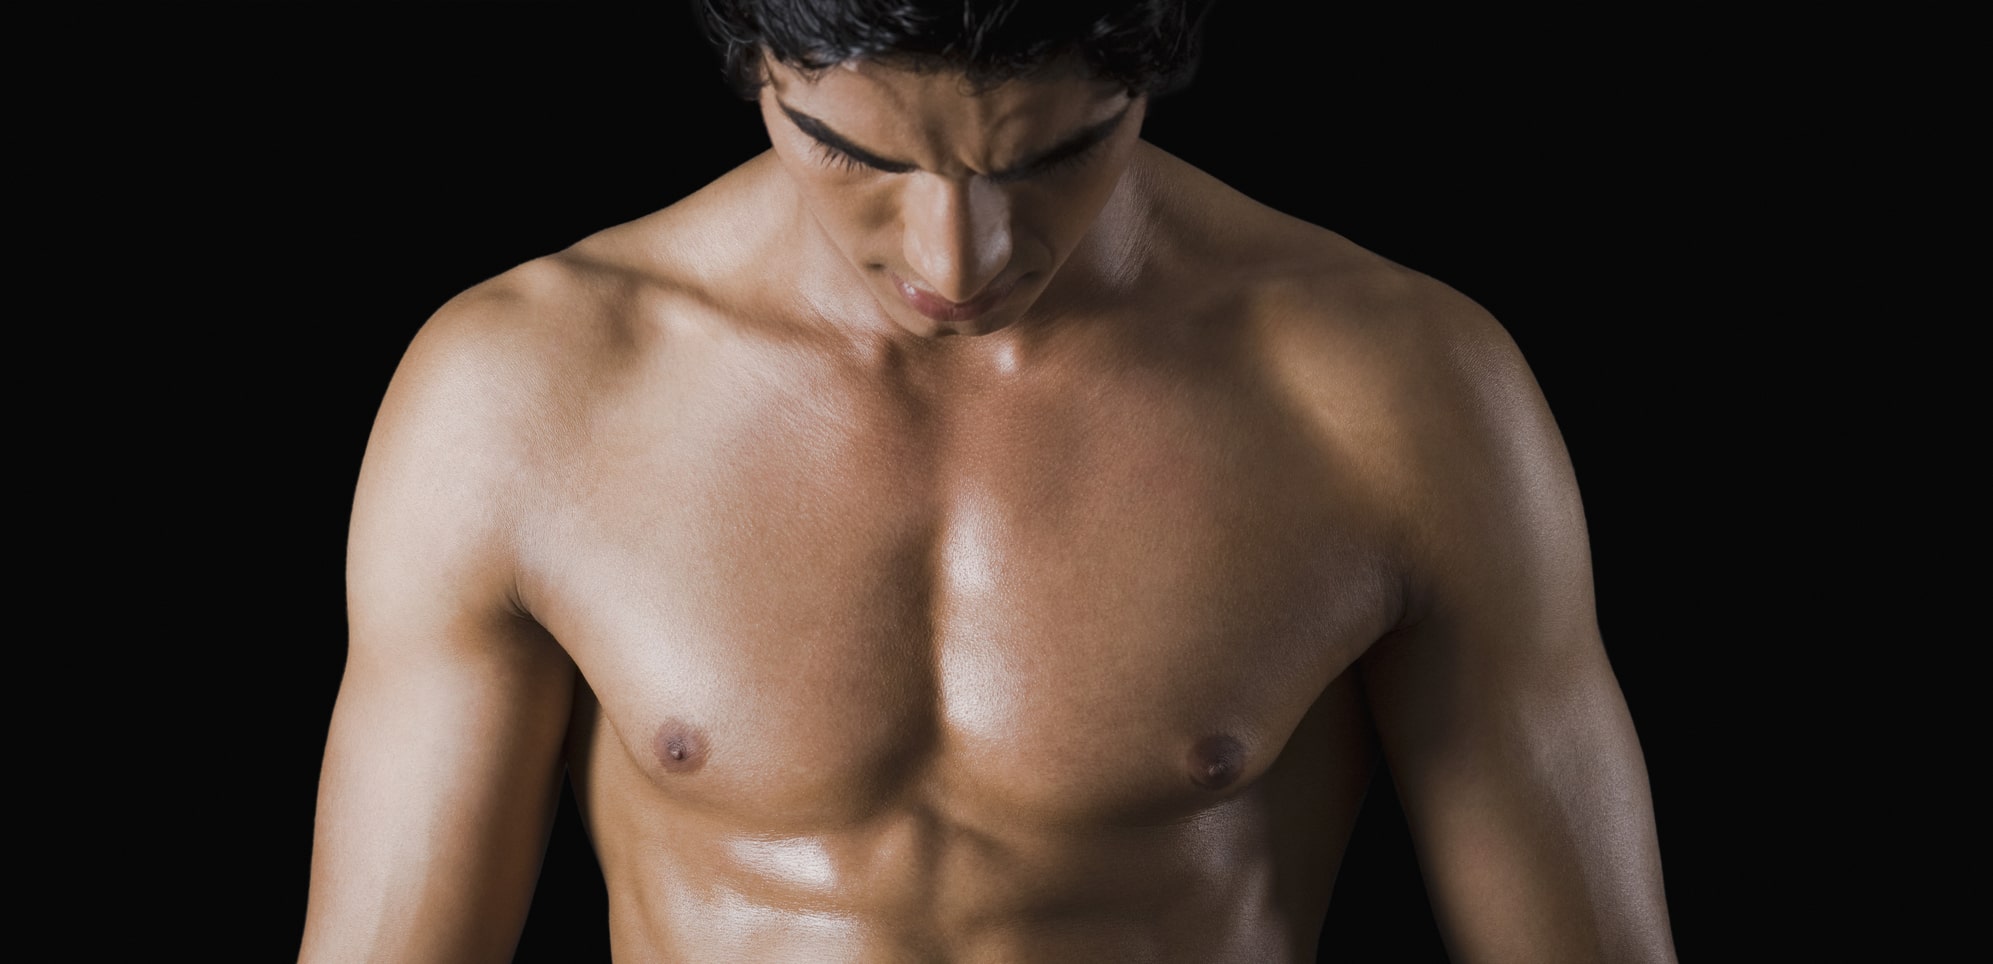 Pectoral Implants - Do They Impact Muscle Growth